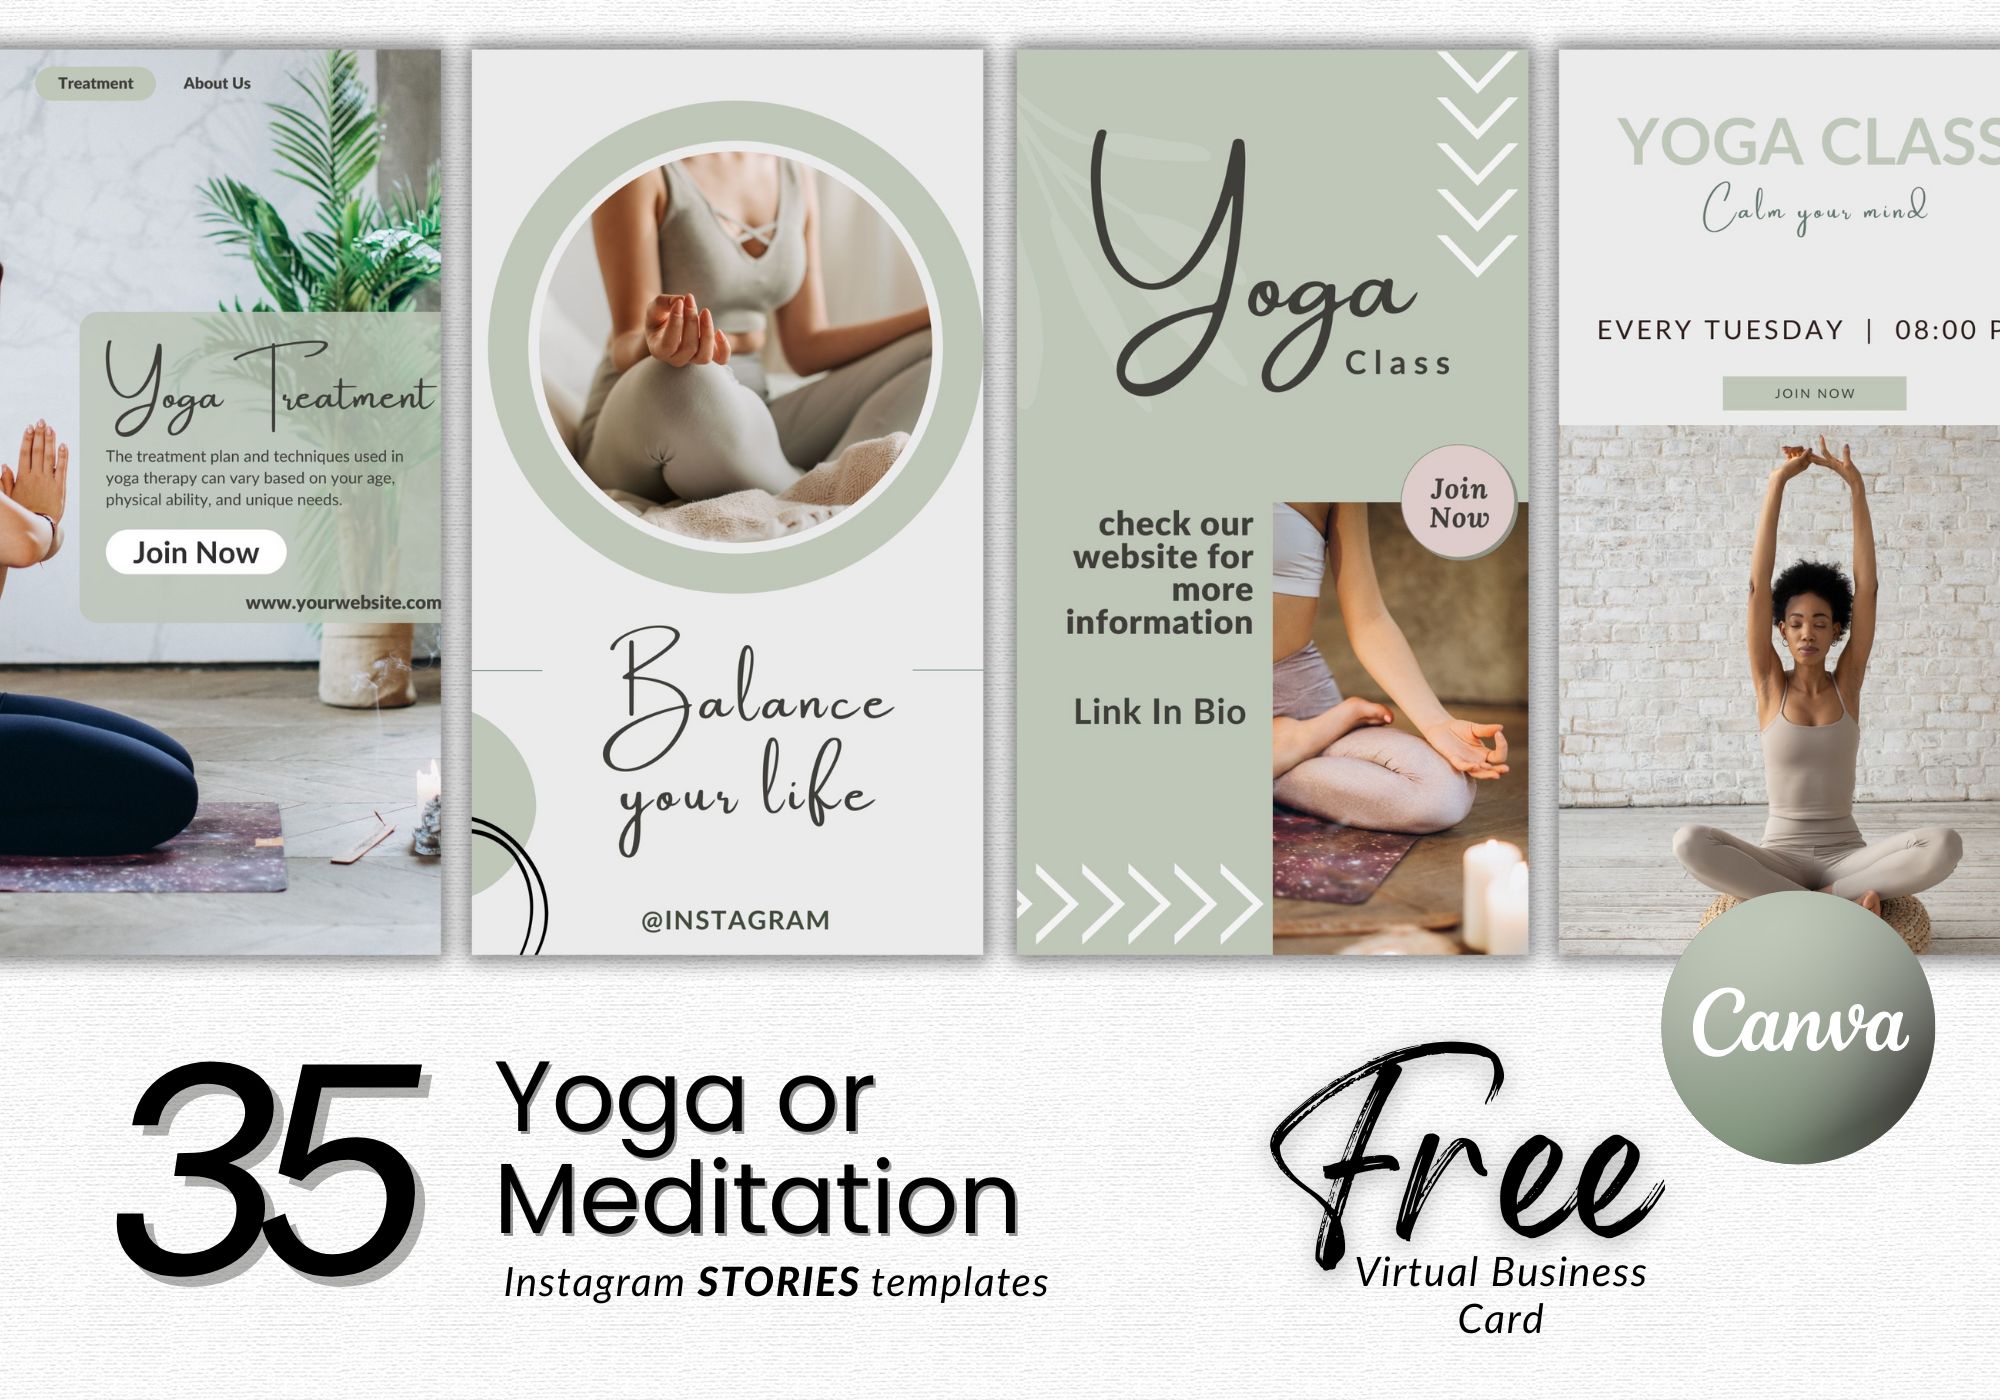 Yoga Instagram Templates by Talipic Designs on Dribbble